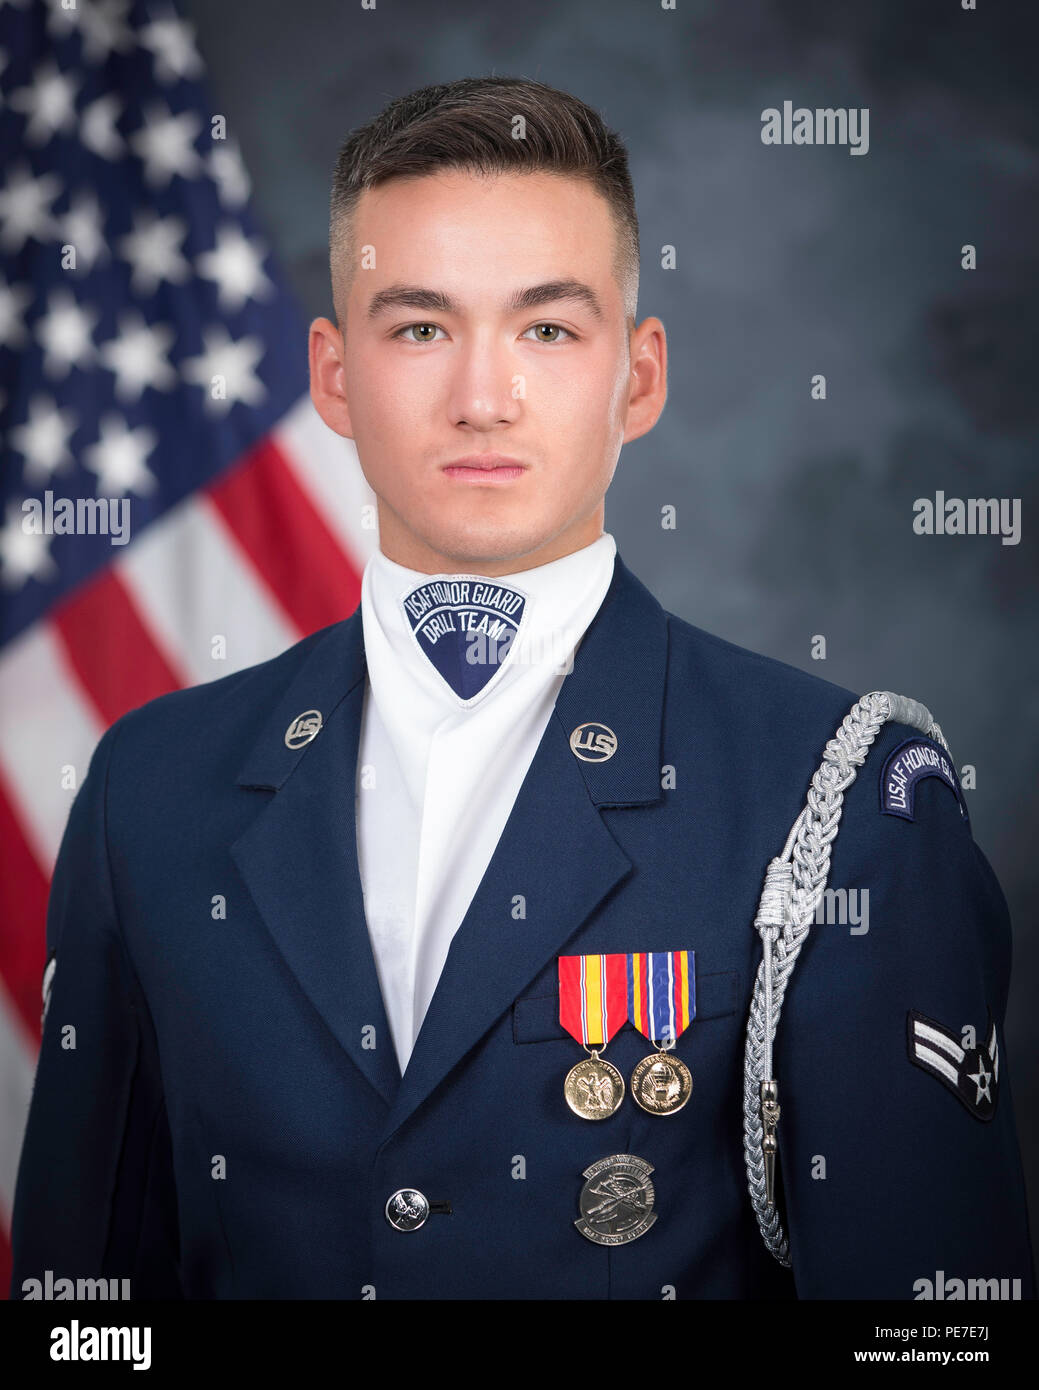 Official portrait of U.S. Air Force Honor Guard Drill Team member Airman 1st Class Kosei K. Carty, U.S. Air Force, a native of Keene, New Hampshire, photographed at Joint Base Anacostia-Bolling Oct. 9, 2015. Stock Photo